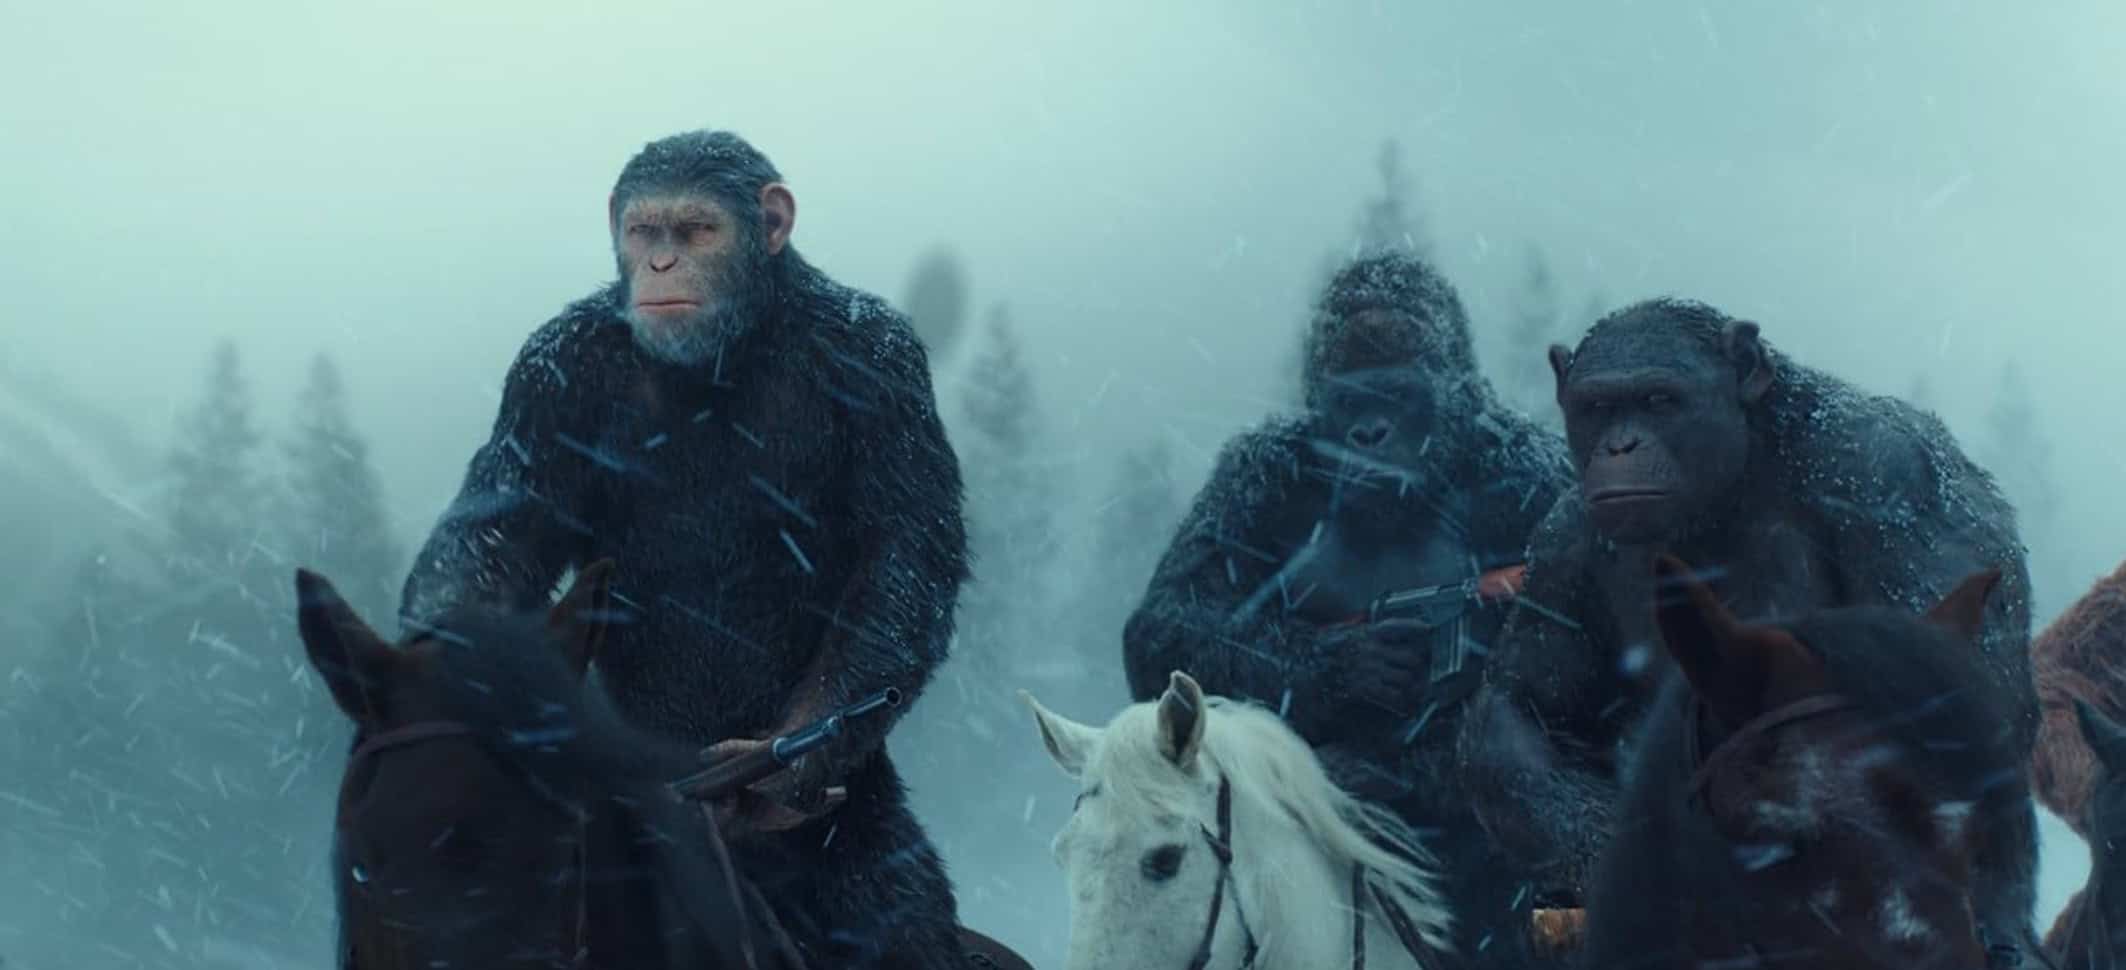 Apes ride horses in the snow in this image from Chernin Entertainment.